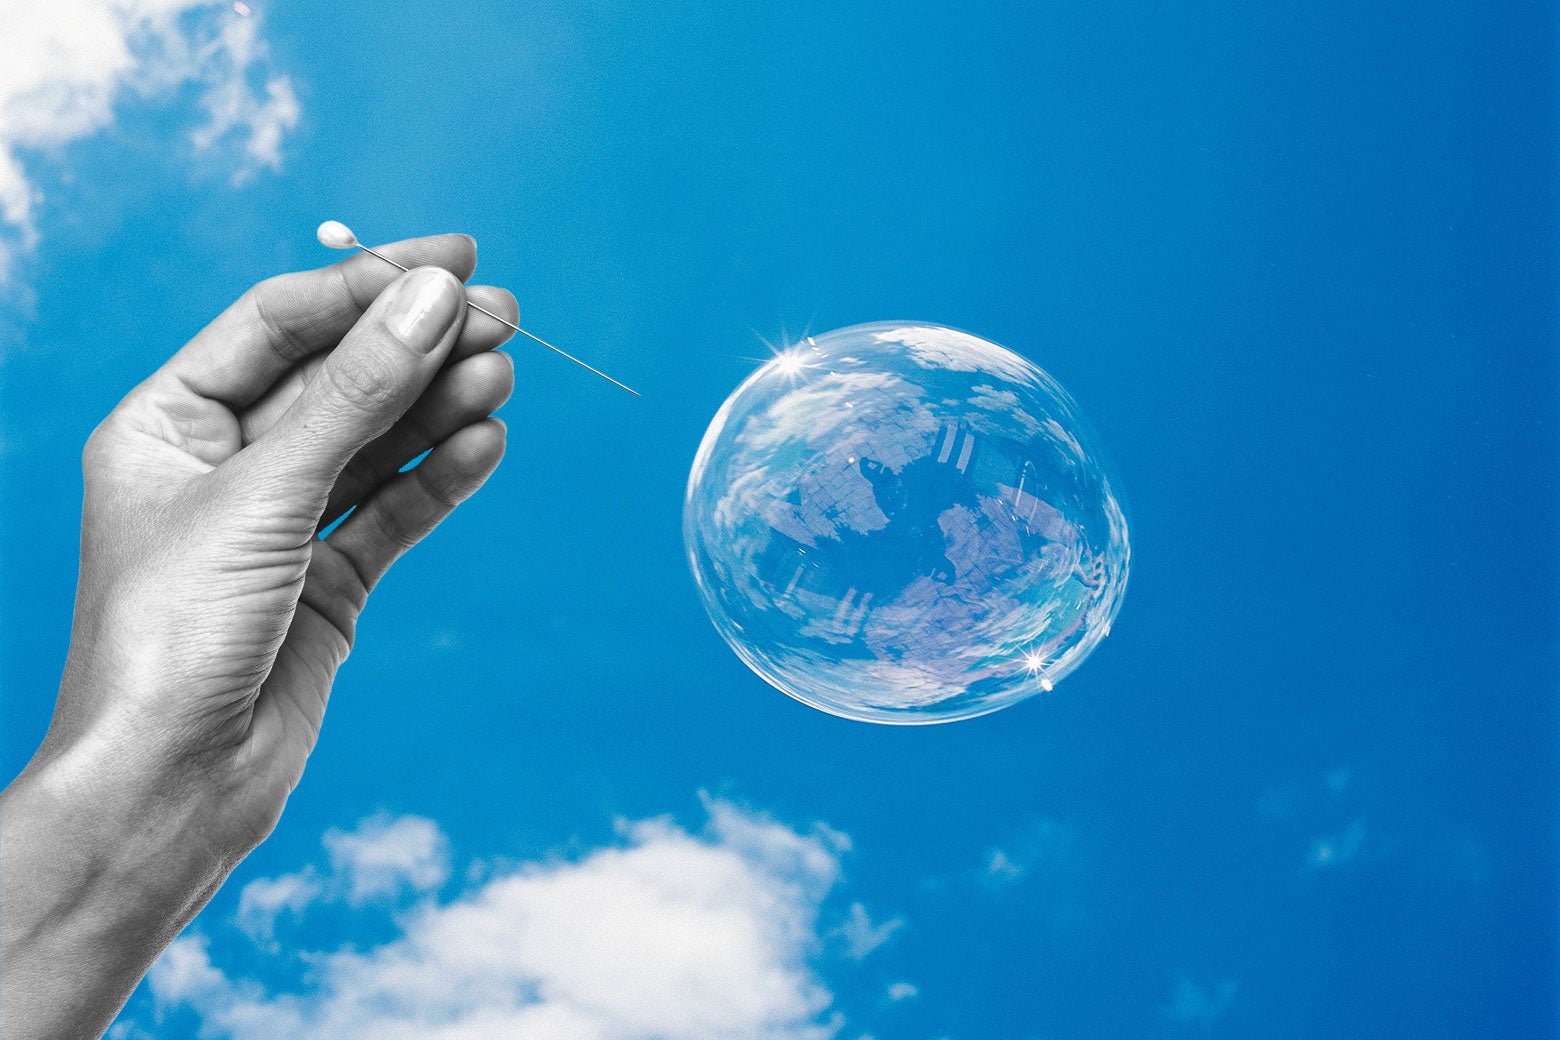 Photo illustration: Someone popping a bubble with a pin.